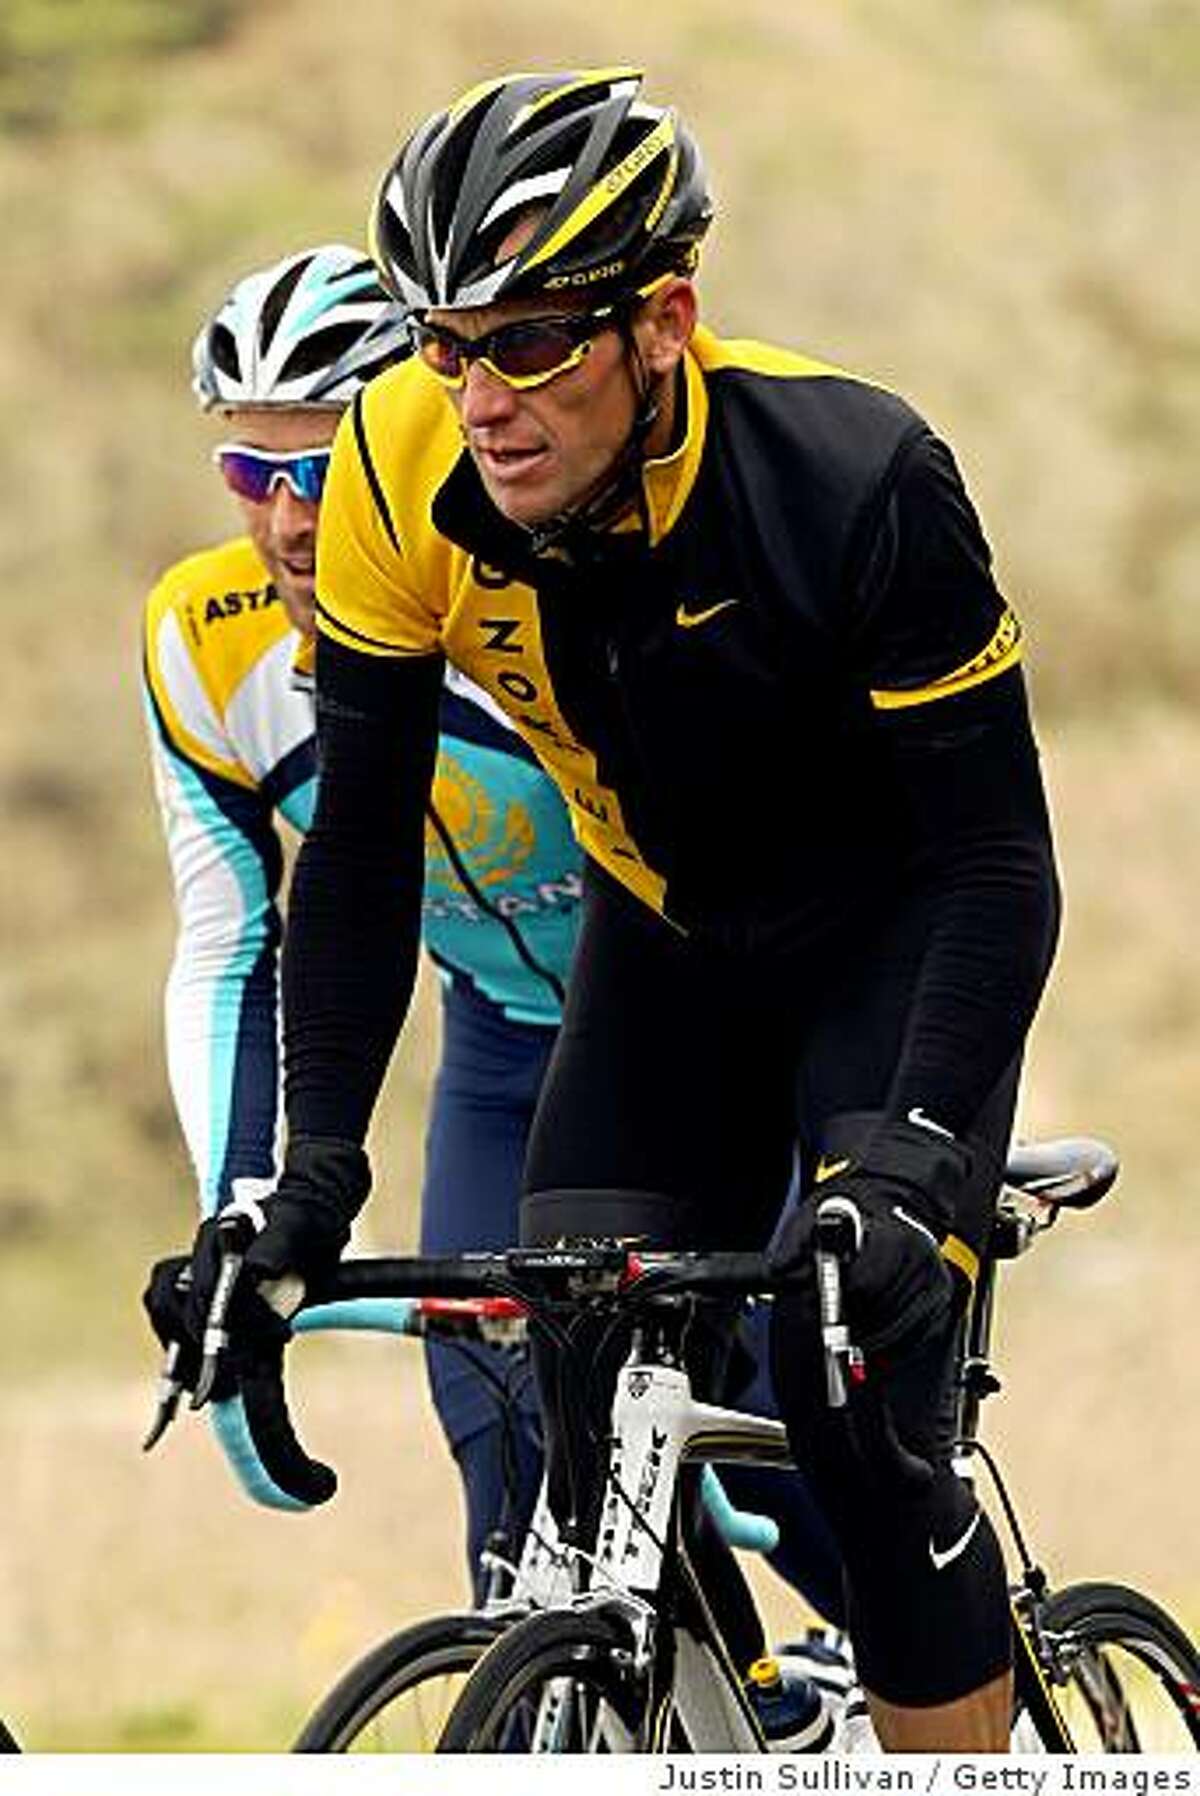 JENNER, CA - FEBRUARY 04: Astana Cycling Team rider Lance Armstrong rides up a hill during a training camp February 4, 2008 in Jenner, California. Astana team riders are preaparing for the Tour of California which begins on February 15th in Sacramento, California. (Photo by Justin Sullivan/Getty Images)